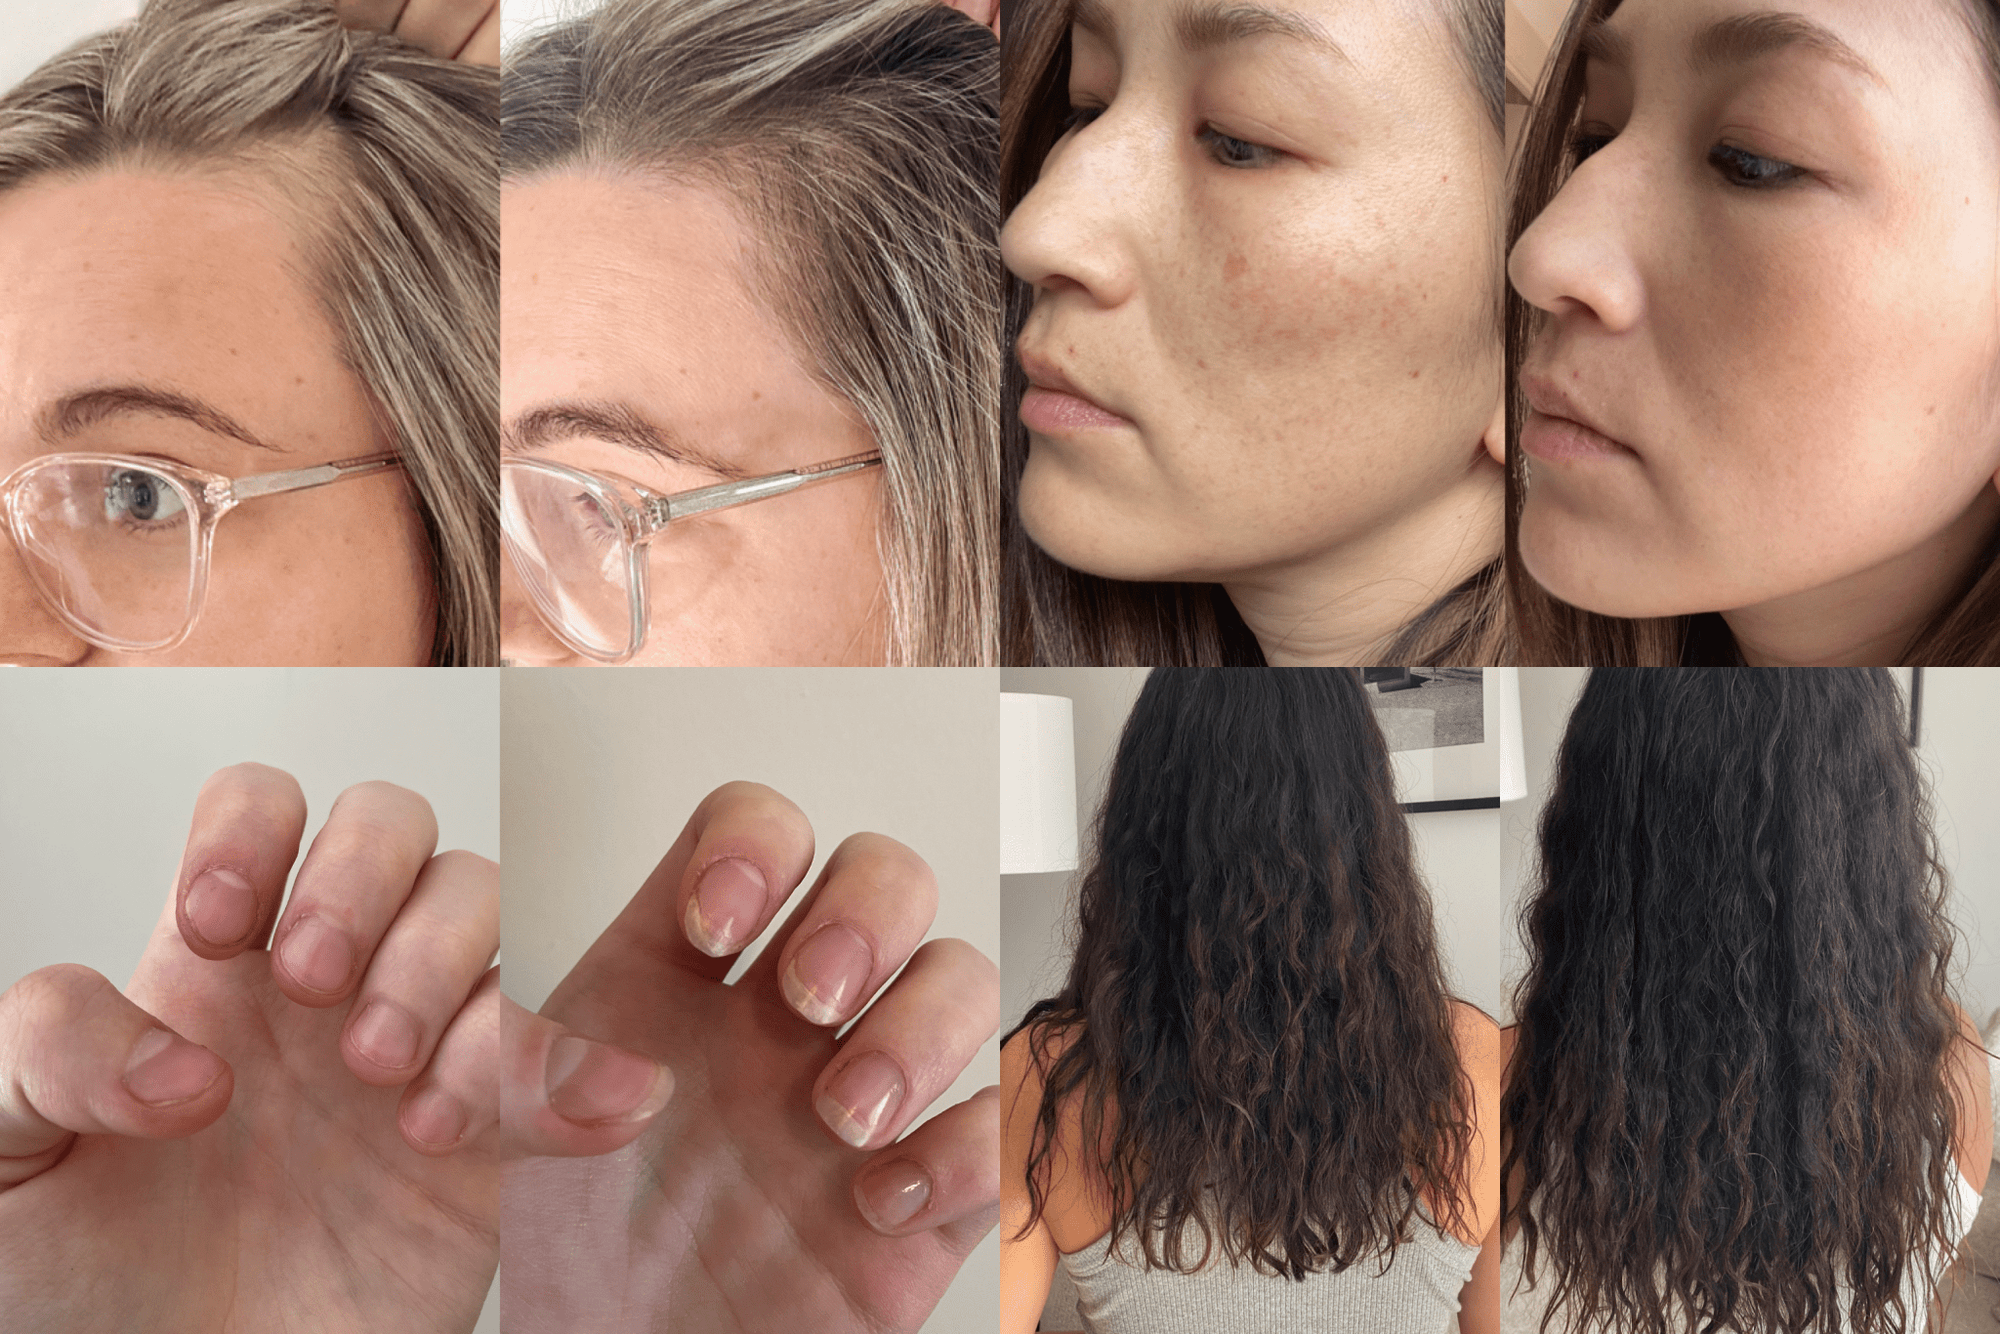 What to Expect before and after Collagen (4 Results Backed with Customer Photos) - The Collagen Co.